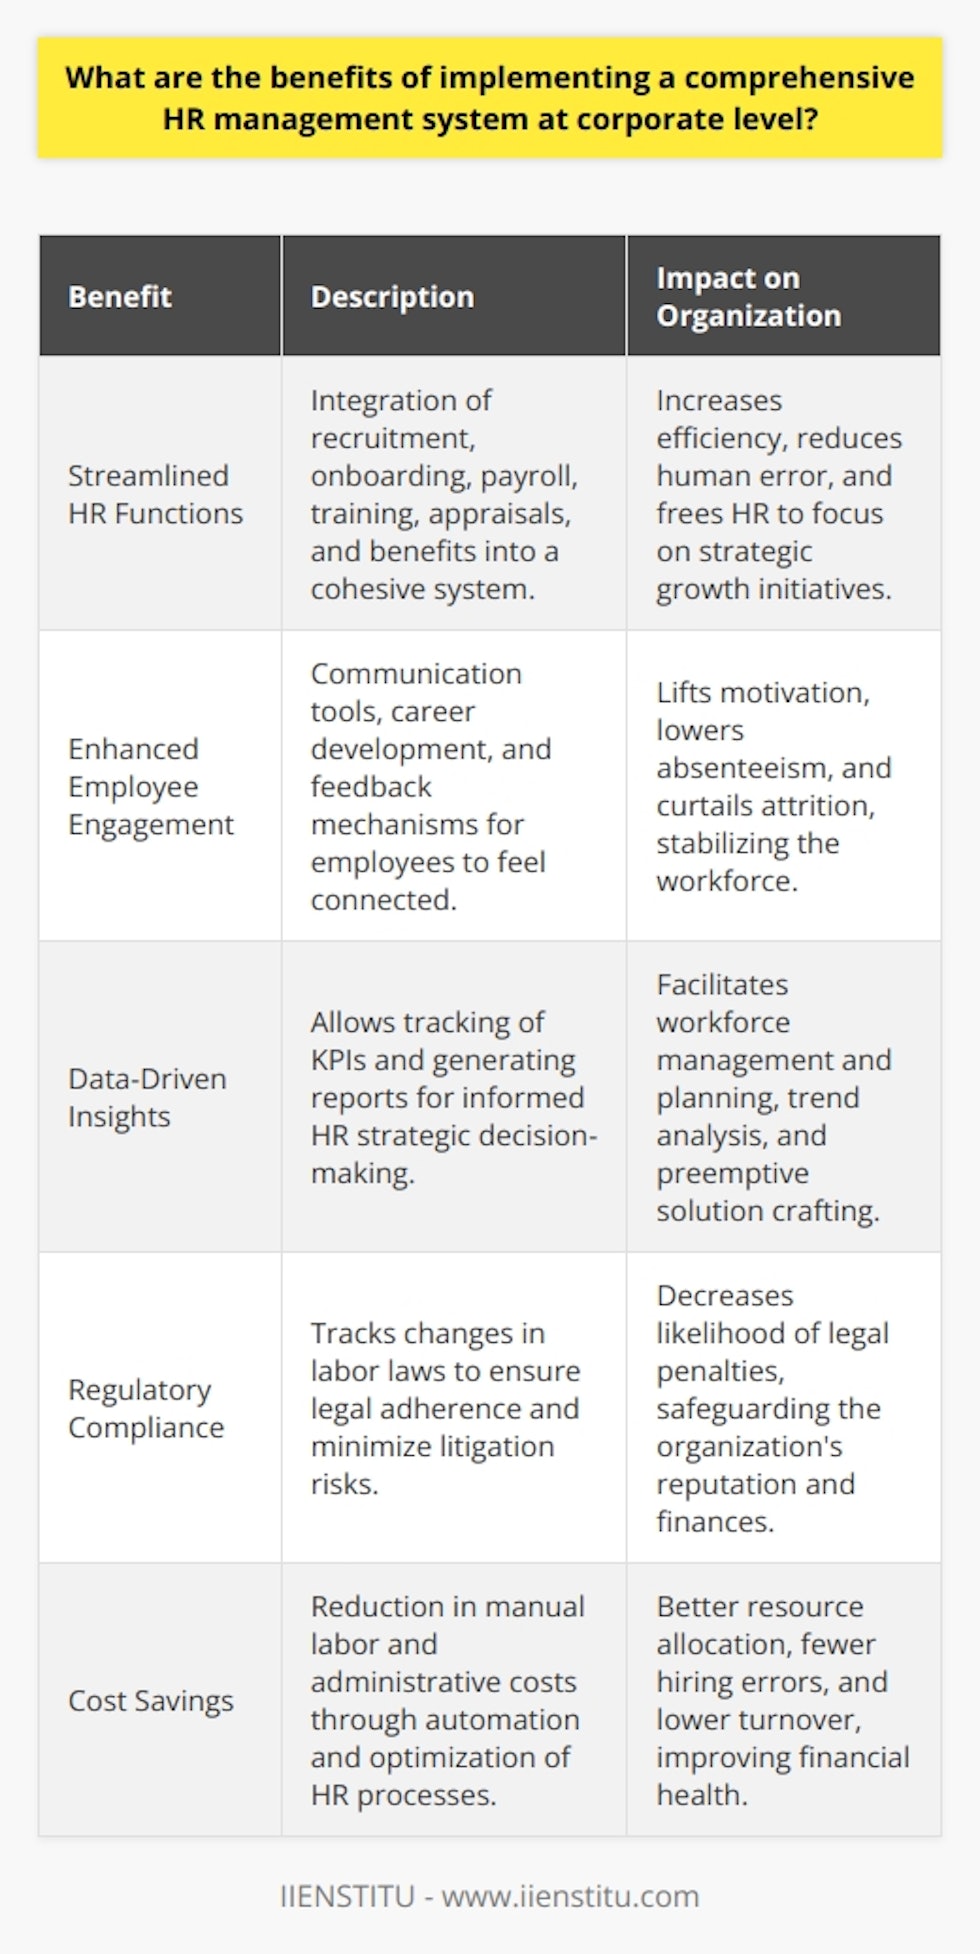 Implementing a comprehensive Human Resource (HR) management system at the corporate level can significantly benefit an organization by enhancing its overall performance and operational effectiveness. Such a system optimizes HR functions by providing a cohesive framework for managing all employee-related processes, yielding several substantial advantages.One of the primary benefits is the streamlined completion of HR-related tasks, which can substantially elevate organizational efficiency and productivity. By integrating various HR components, including recruitment, onboarding, payroll management, employee training, performance appraisals, and benefits administration, an organization ensures that all processes are aligned and executed efficiently. Automation of these routine tasks reduces the potential for human error and allows HR professionals to focus on more strategic initiatives that can foster organizational growth.A comprehensive HR management system can also dramatically improve employee engagement. Such a system typically features tools for communication, career development, and feedback mechanisms that enable employees to feel connected to the organization's objectives and value their role within it. Higher engagement often correlates with increased employee motivation, reduced absenteeism, and decreased attrition rates, which are pivotal to maintaining a stable and high-performing workforce.Furthermore, the centralized nature of a comprehensive HR management system allows for effective data collection and analysis. Organizations can track key performance indicators (KPIs) and generate insightful reports that help in making informed decisions regarding hiring practices, resource allocation, and overall HR strategy. This data-driven approach aids in identifying trends, anticipating challenges, and proactively crafting solutions, resulting in improved workforce management and planning.Maintaining legal compliance is another significant advantage of implementing a comprehensive HR system. With ever-evolving labor laws and regulations, organizations face the constant challenge of remaining compliant to avoid legal repercussions. A robust HR management system can help keep track of these changes and ensure the organization adheres to all legal requirements, thereby minimizing the risk of litigation and associated financial penalties.Finally, from a financial perspective, a sophisticated HR management system can lead to considerable cost savings for an organization. By automating and optimizing HR processes, the system minimizes the need for extensive manual labor and administrative overhead. Efficient workforce management, achieved through the system's analytics and reporting capabilities, allows for better allocation of human resources, fewer hiring mistakes, and reduced turnover, all of which contribute to the organization’s bottom line.In essence, the adoption of a comprehensive HR management system is a strategic move for any corporate entity looking to foster a productive work environment, engage and retain top talent, make informed decisions, ensure regulatory compliance, and realize cost efficiencies. These formidable advantages give organizations equipped with such systems a competitive edge, ultimately contributing to their long-term success and viability.